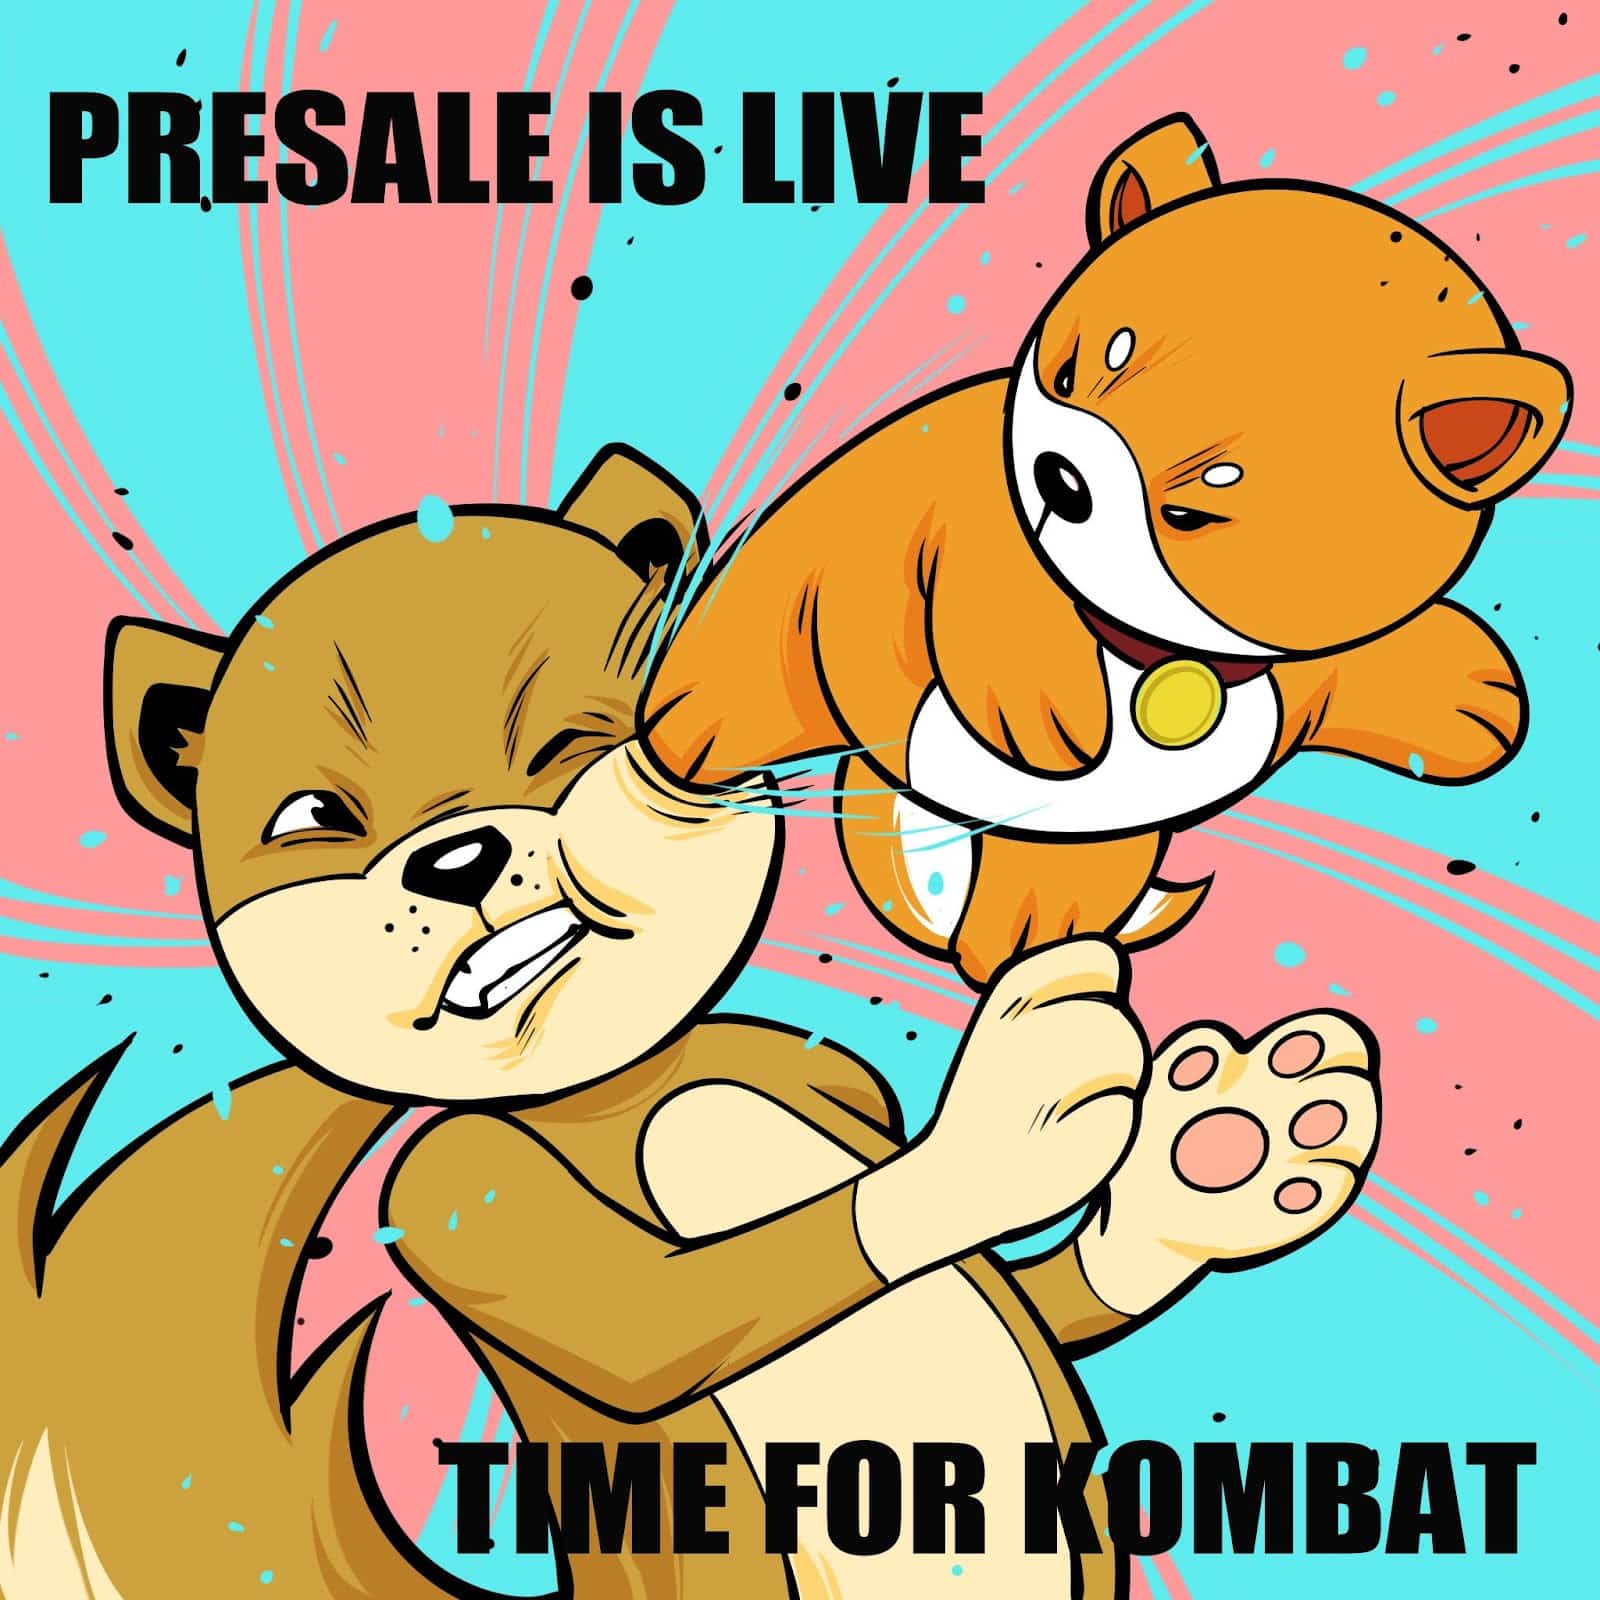 Pepe Coin Killer Presale for Meme Kombat has smashed $1m raised as meme coin capital floods into promising GameFi hotshot project. Read here.